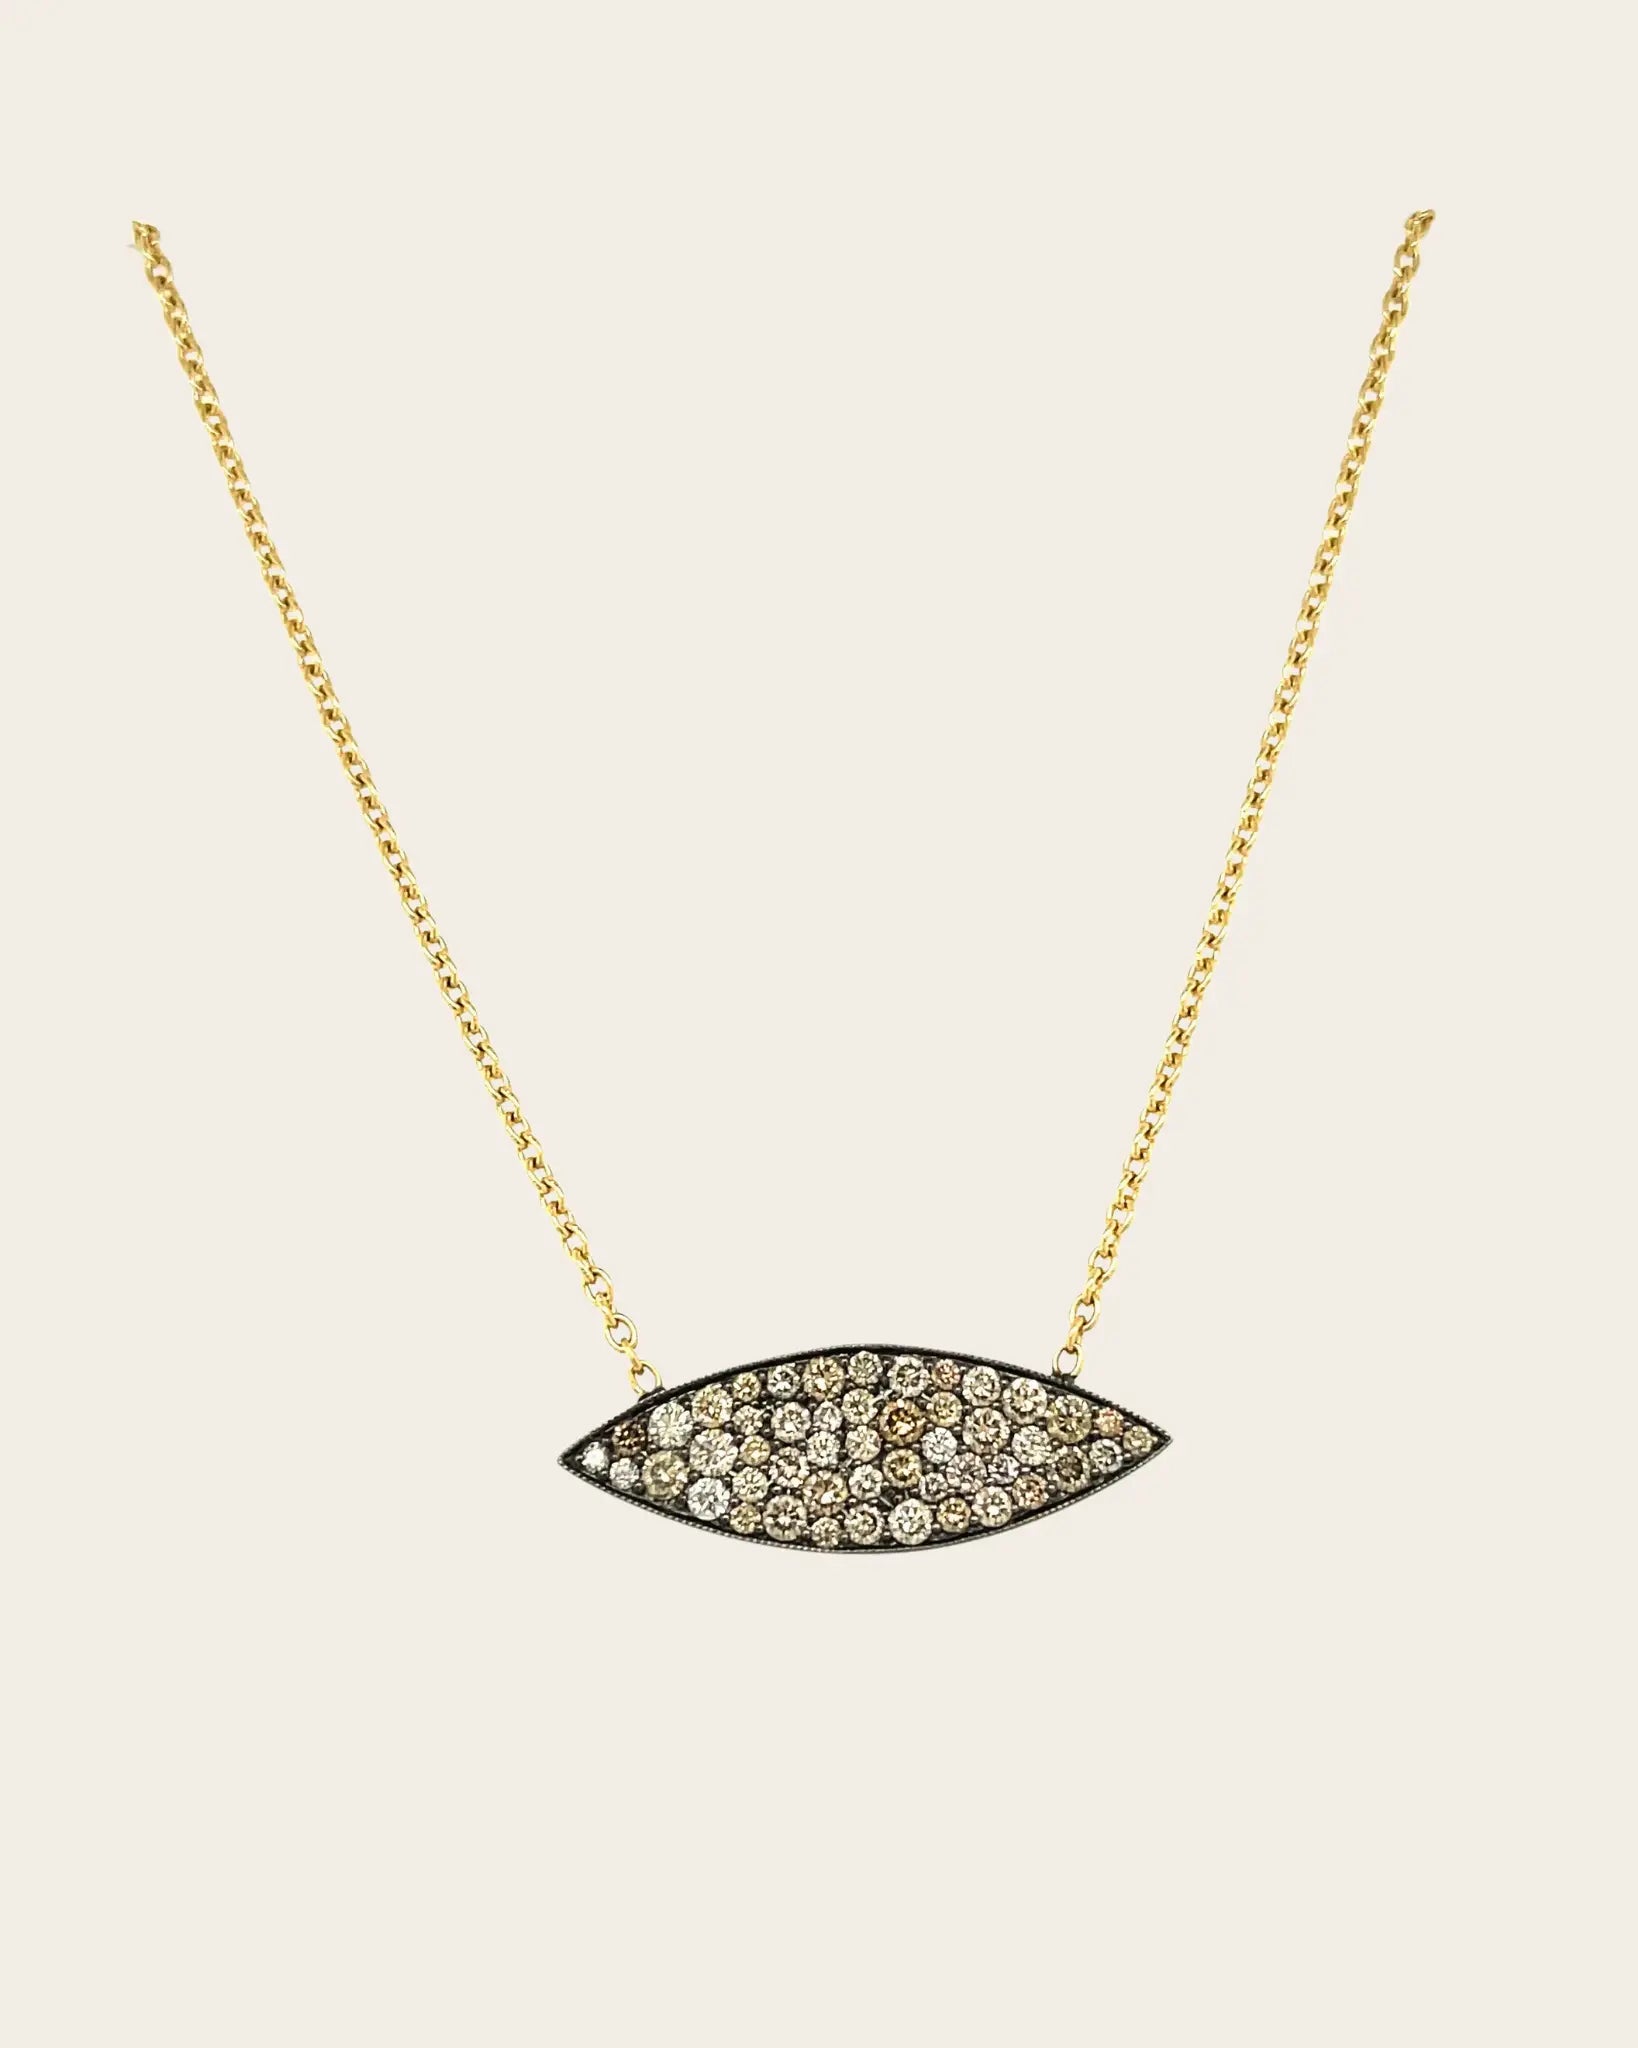 Champagne Diamond Pave Necklace Champagne Diamond Pave Necklace Squash Blossom Original Squash Blossom Original  Squash Blossom Vail